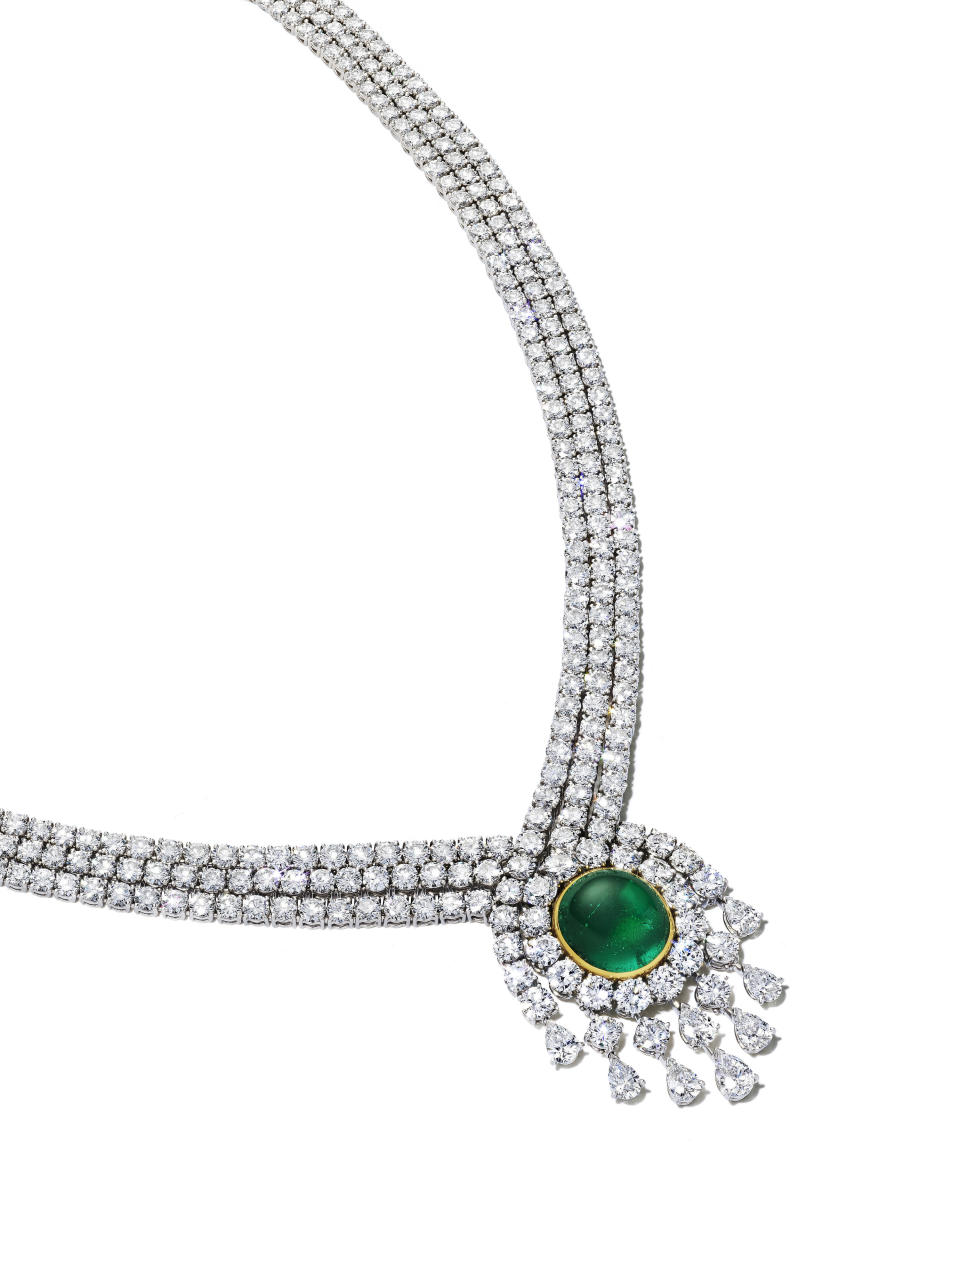 Van Cleef & Arpels - Emerald and Diamond Necklace - The Magnificent Jewels of Anne Eisenhower - Christie's Auction